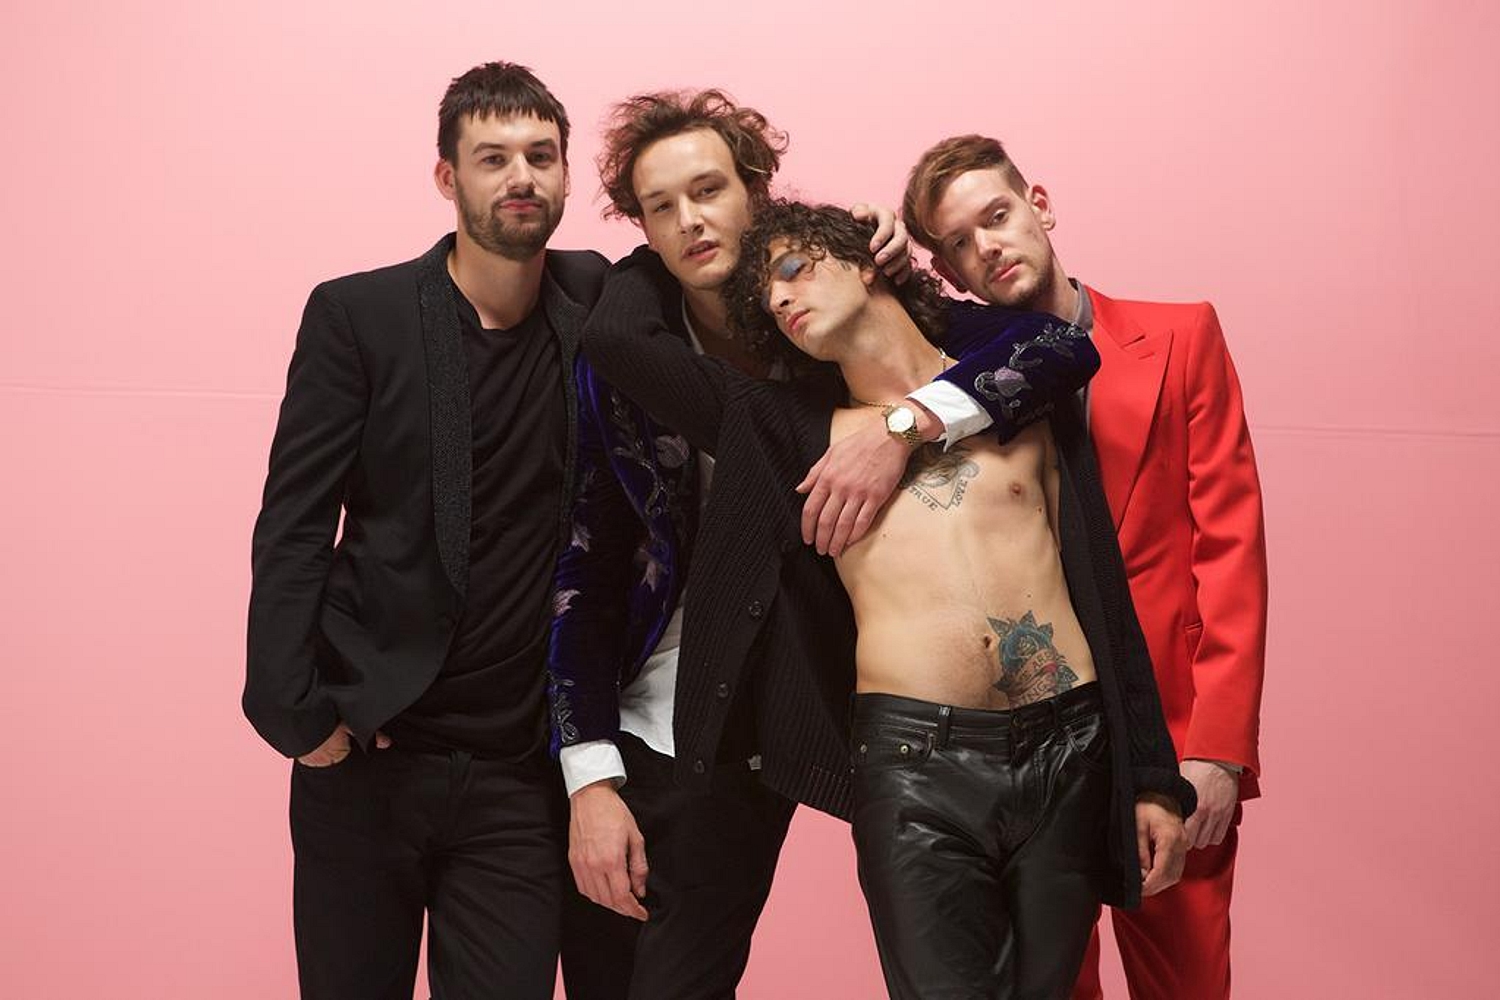 Tracks: The 1975, Sleigh Bells, & More